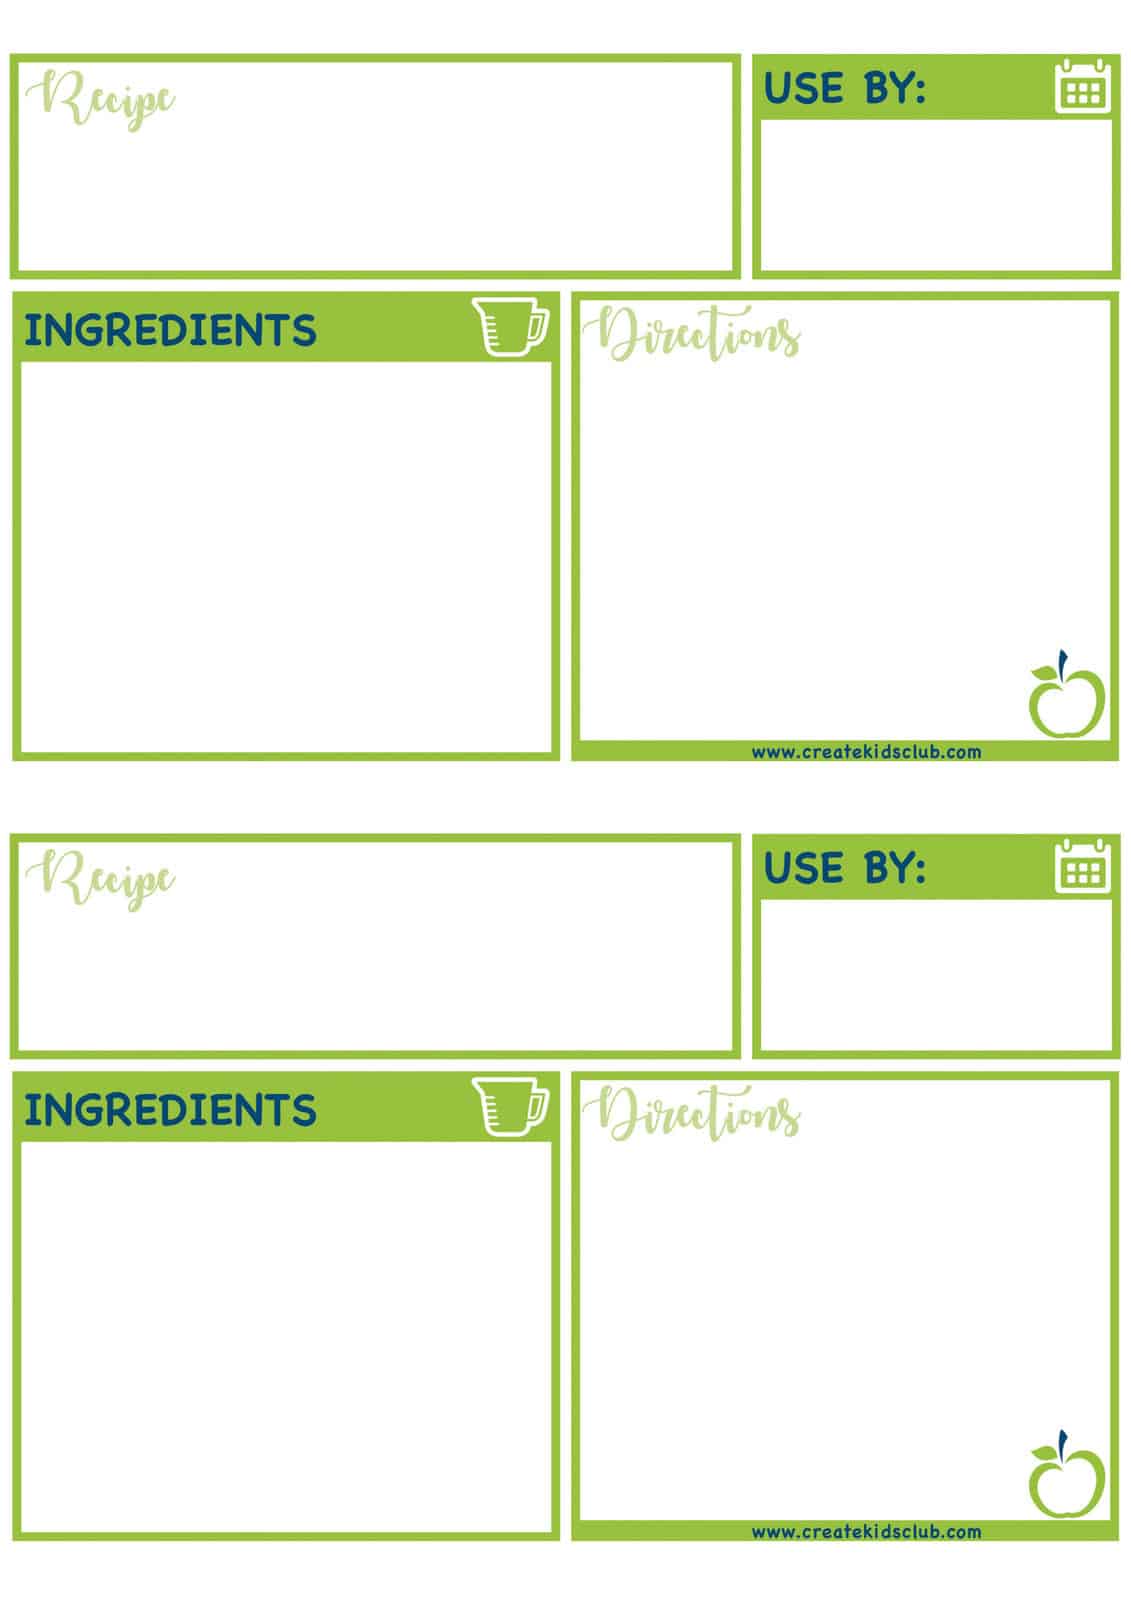 Printable food labels for making freezer meals, includes recipe name, use by date, ingredients, and directions.